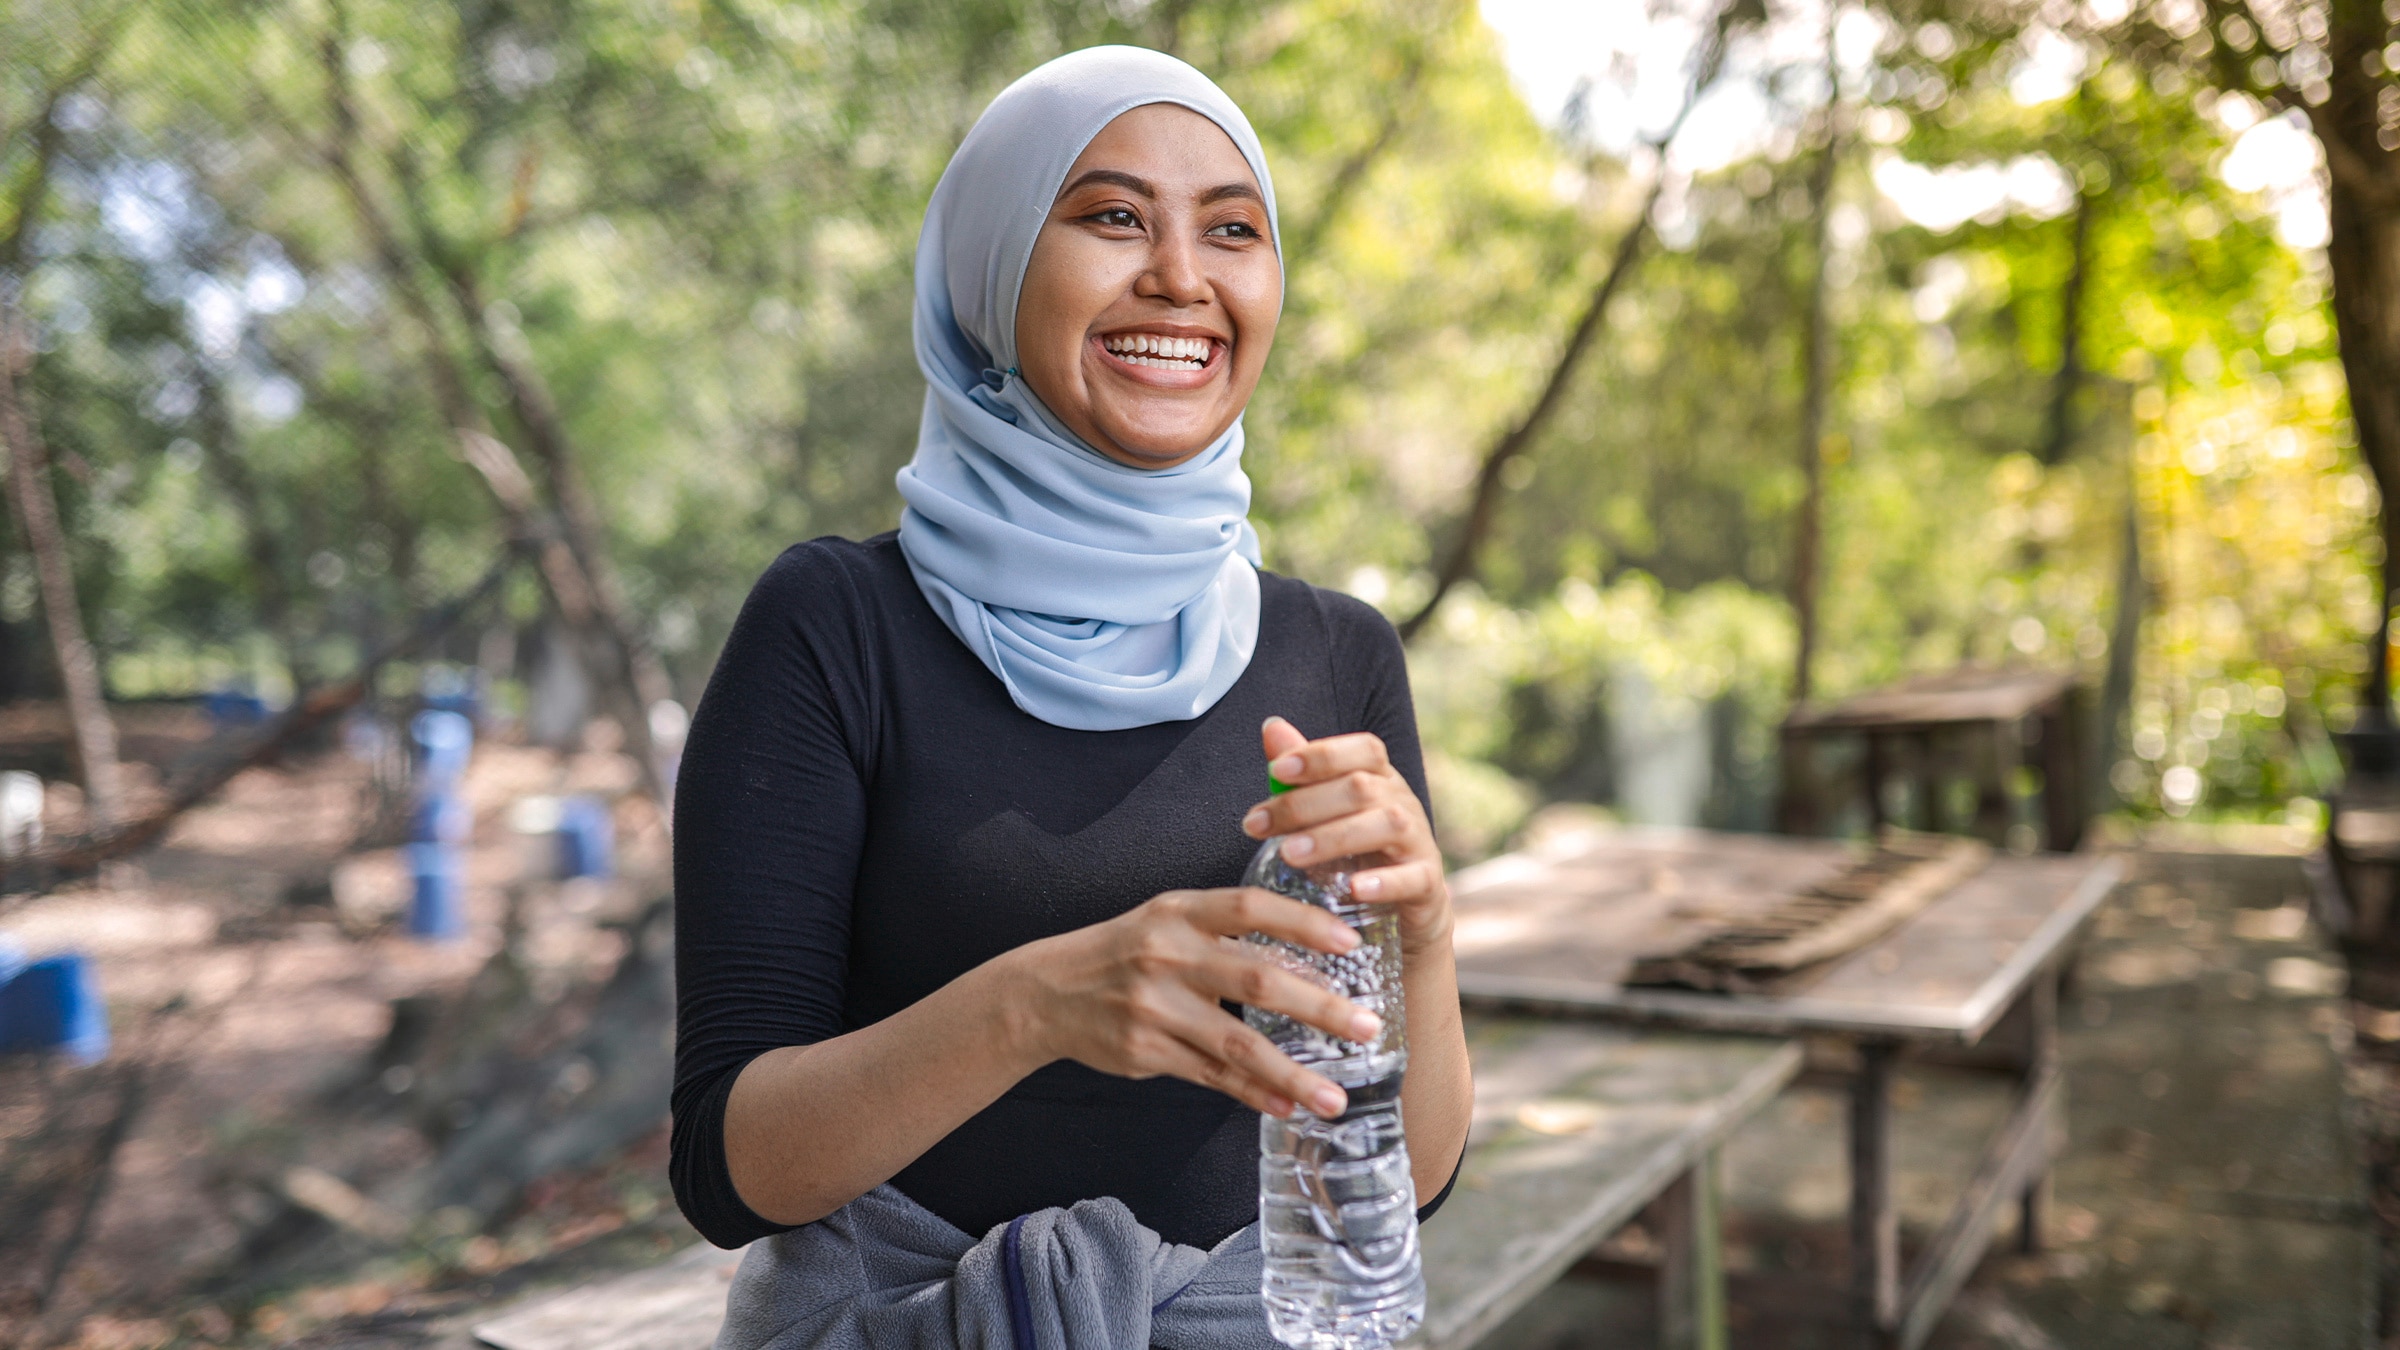 A person is shown smiling and holding a water bottle. They are outside and tables can be seen in the background.